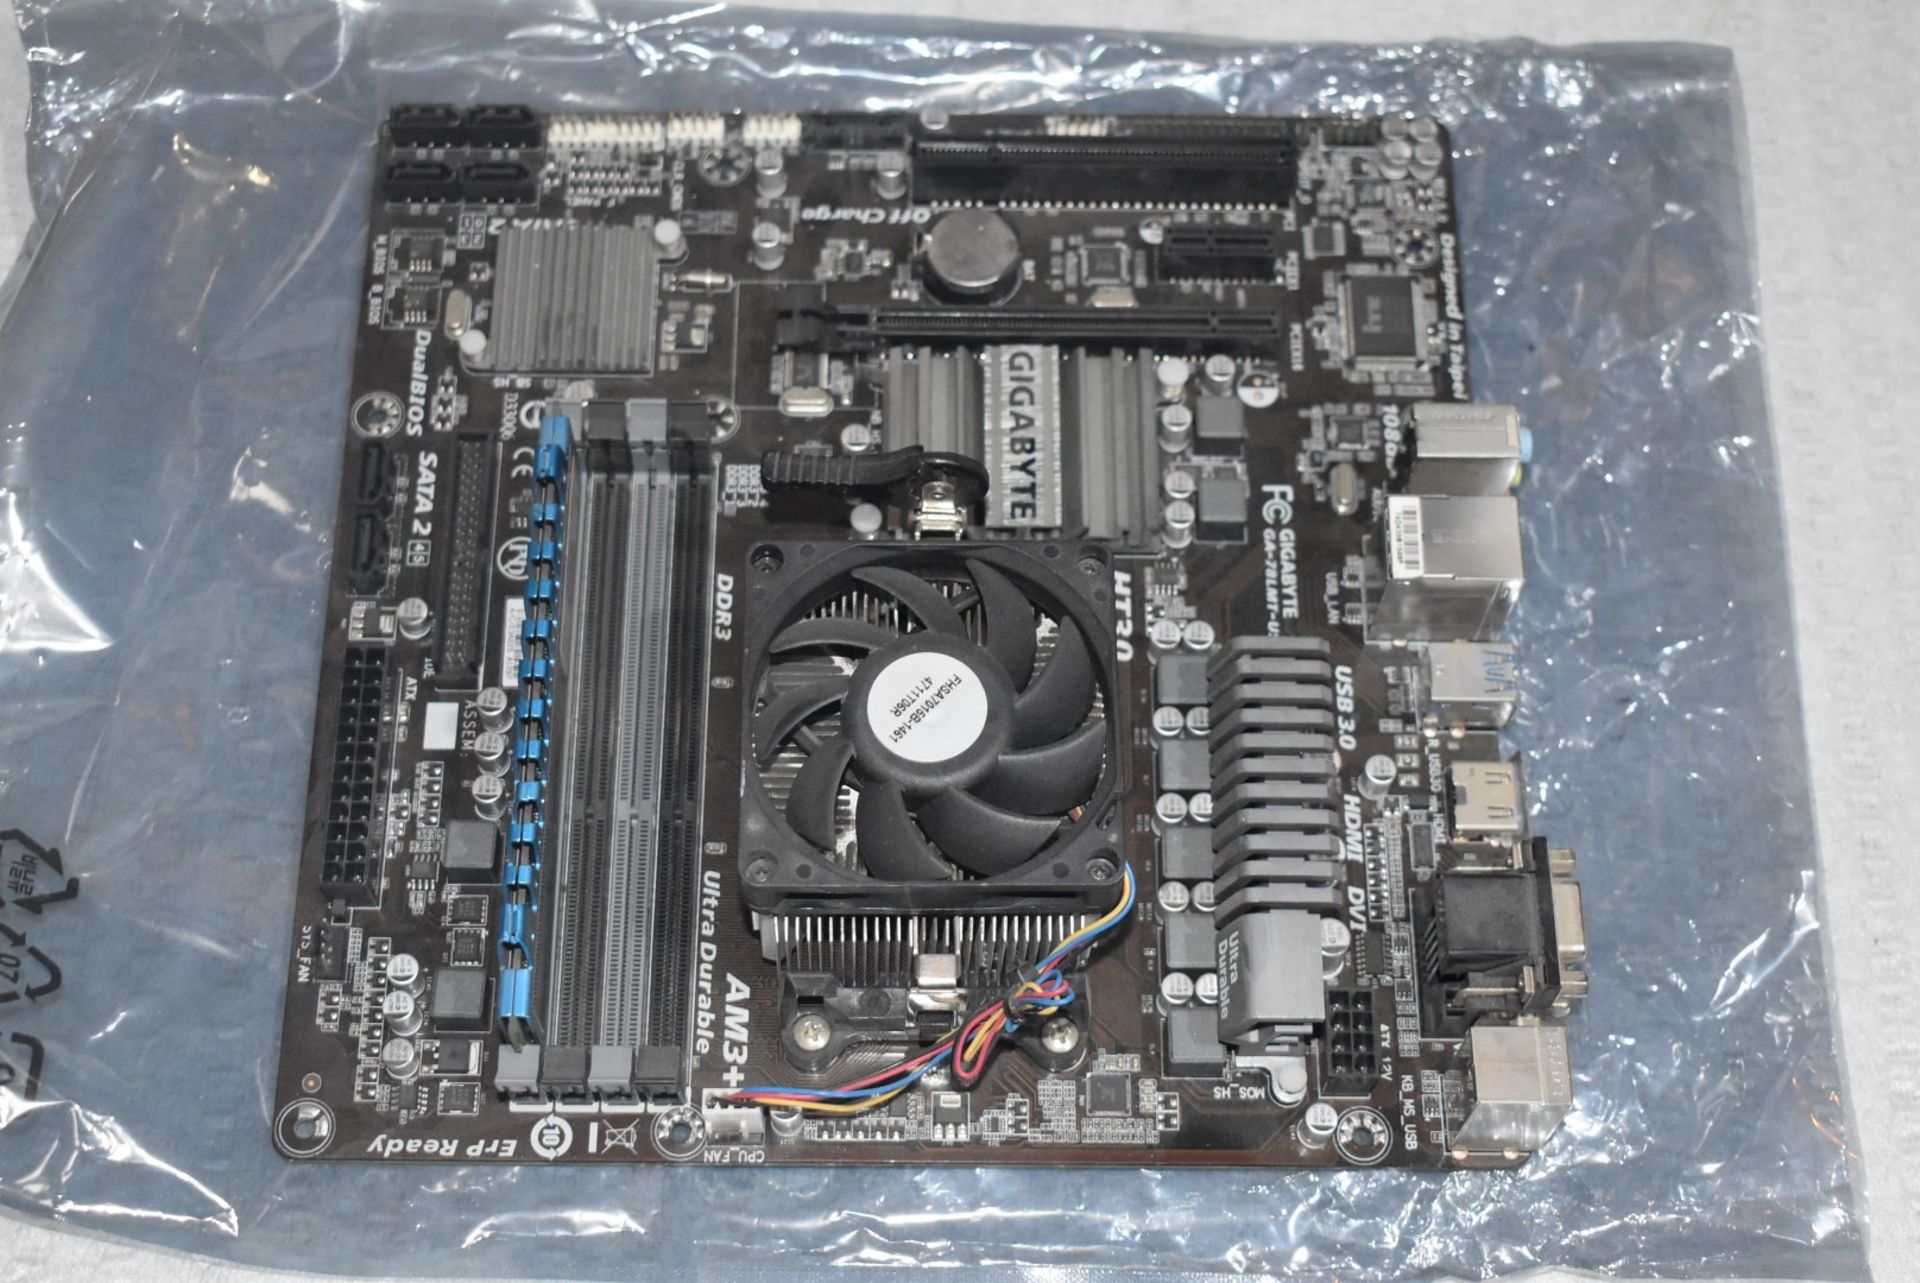 1 x Gigabyte GA-78LMT-USB3 Motherboard With an AMD FX-8370 8 Core Processor and 4gb Ram - Image 2 of 7